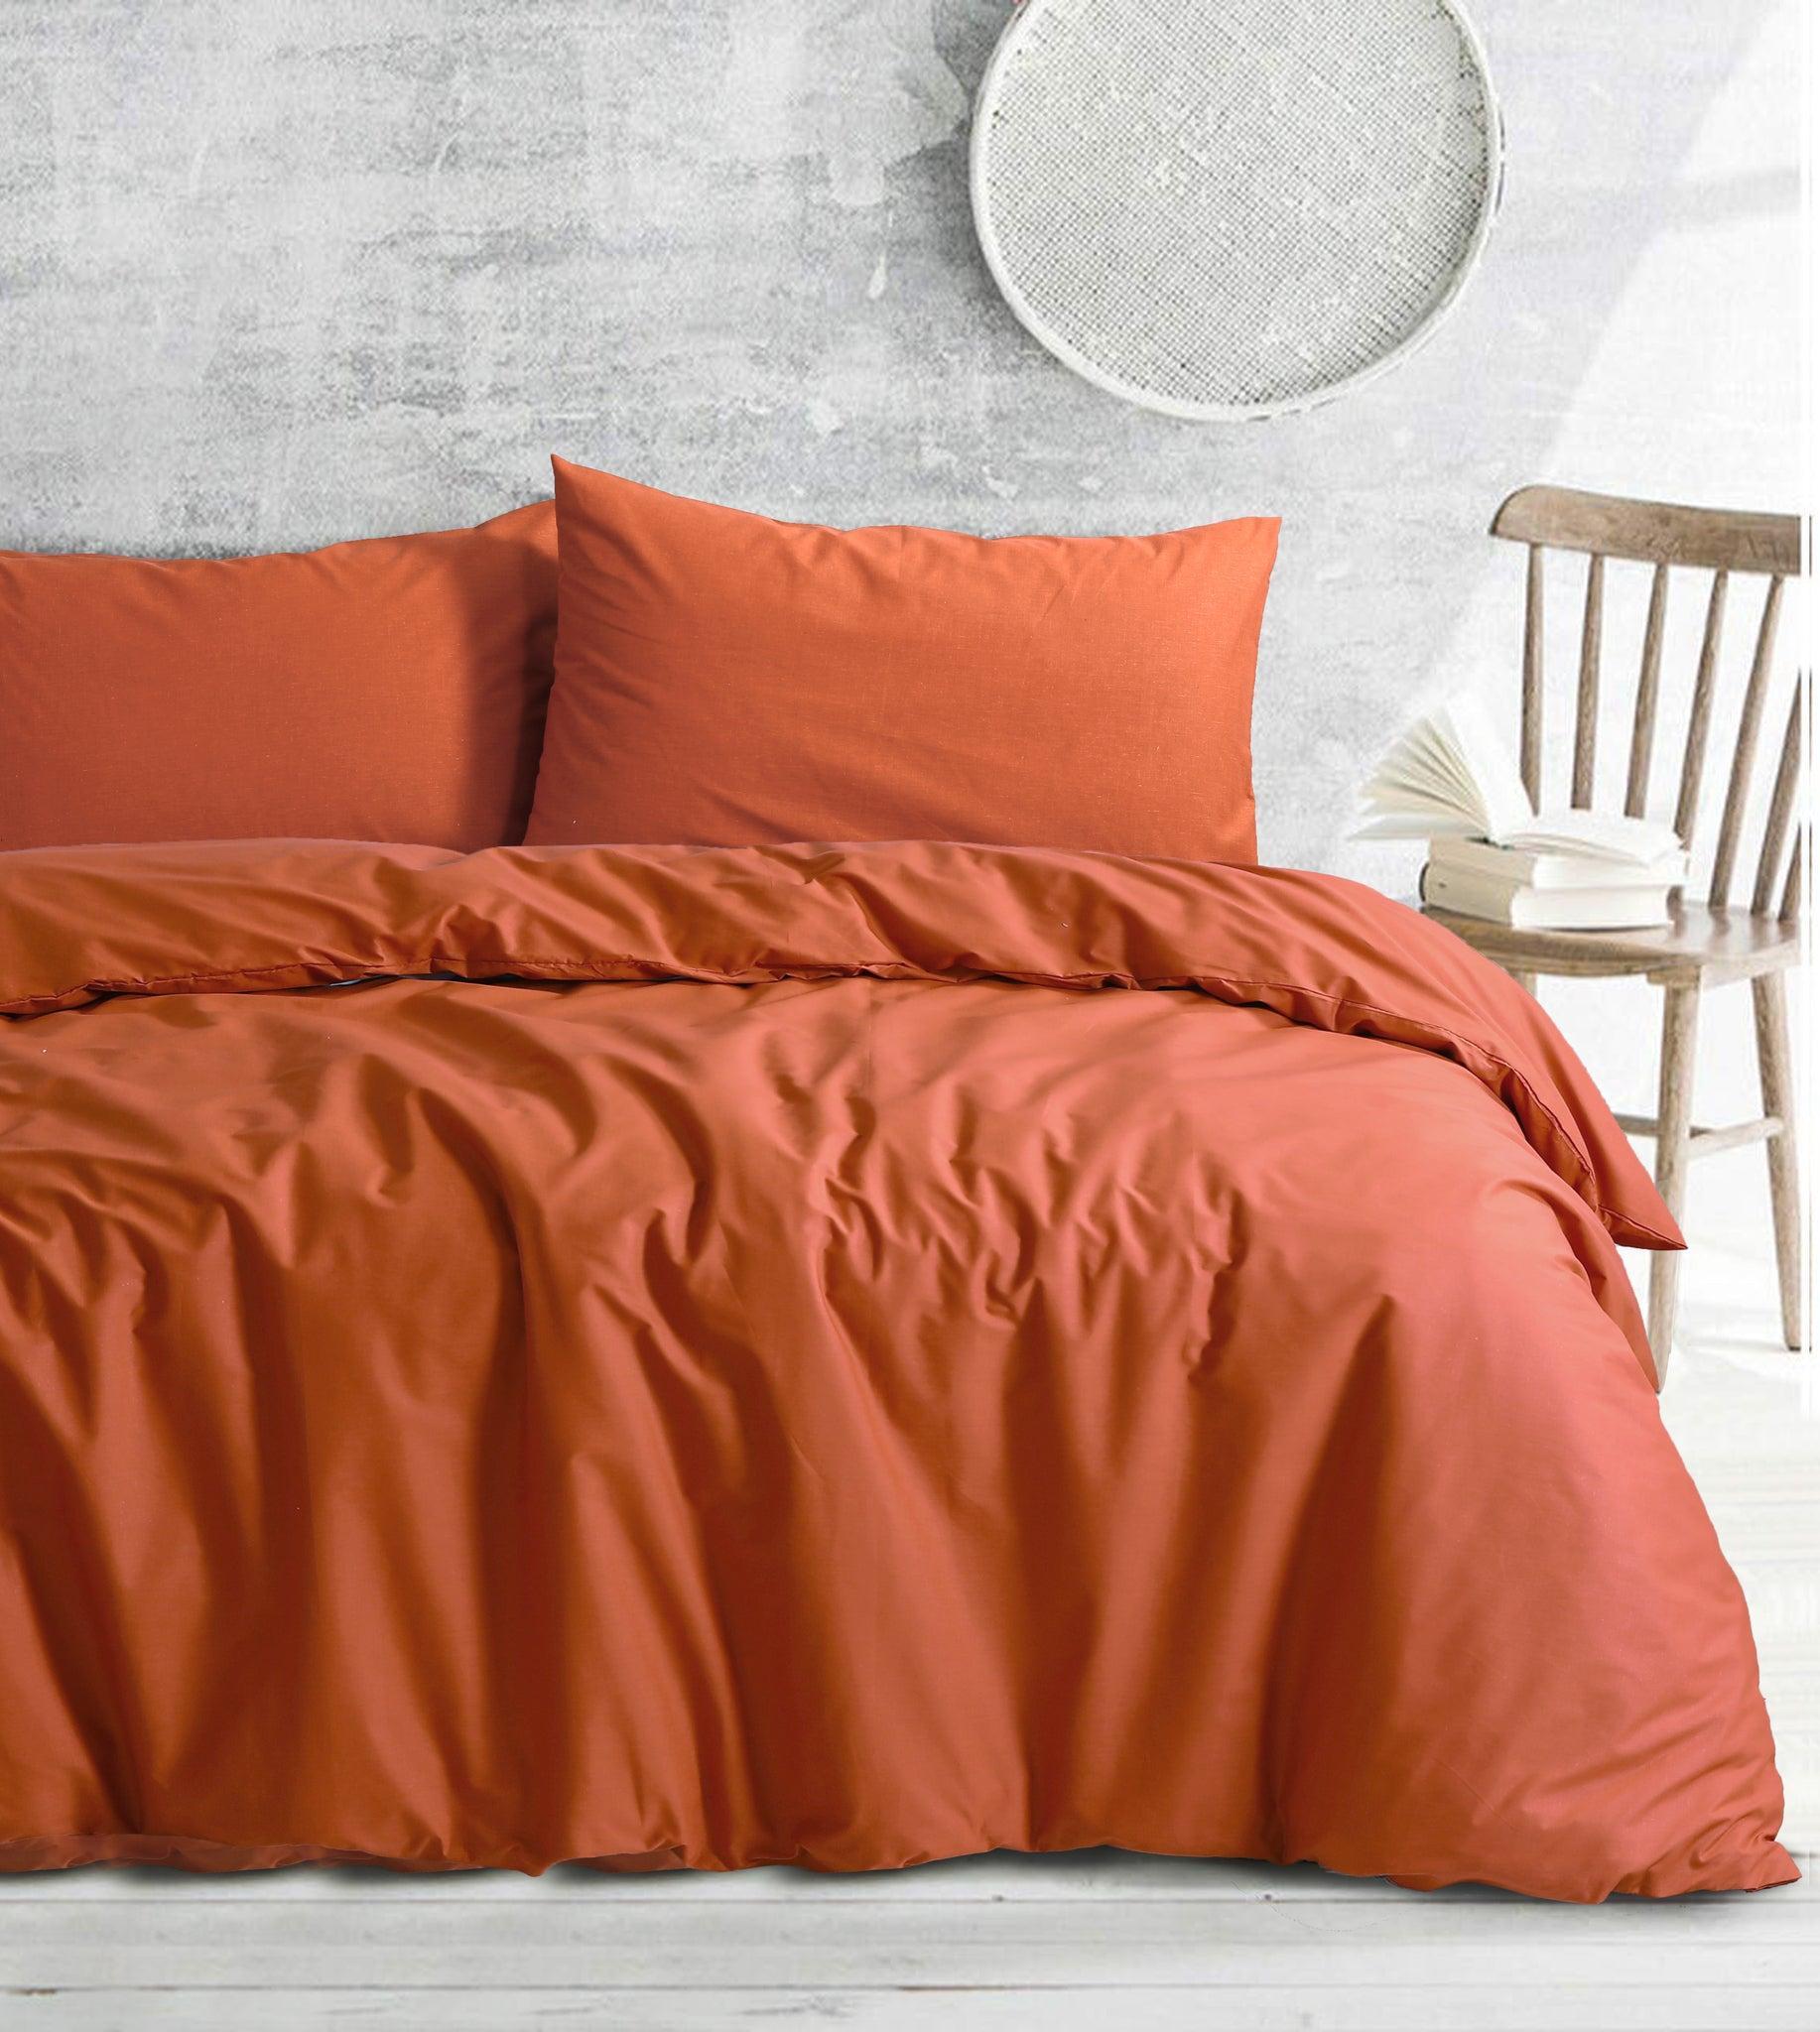 Amsons Royale Cotton Single Quilt Duvet Doona Cover Set with Europeon pillowcases - Rust